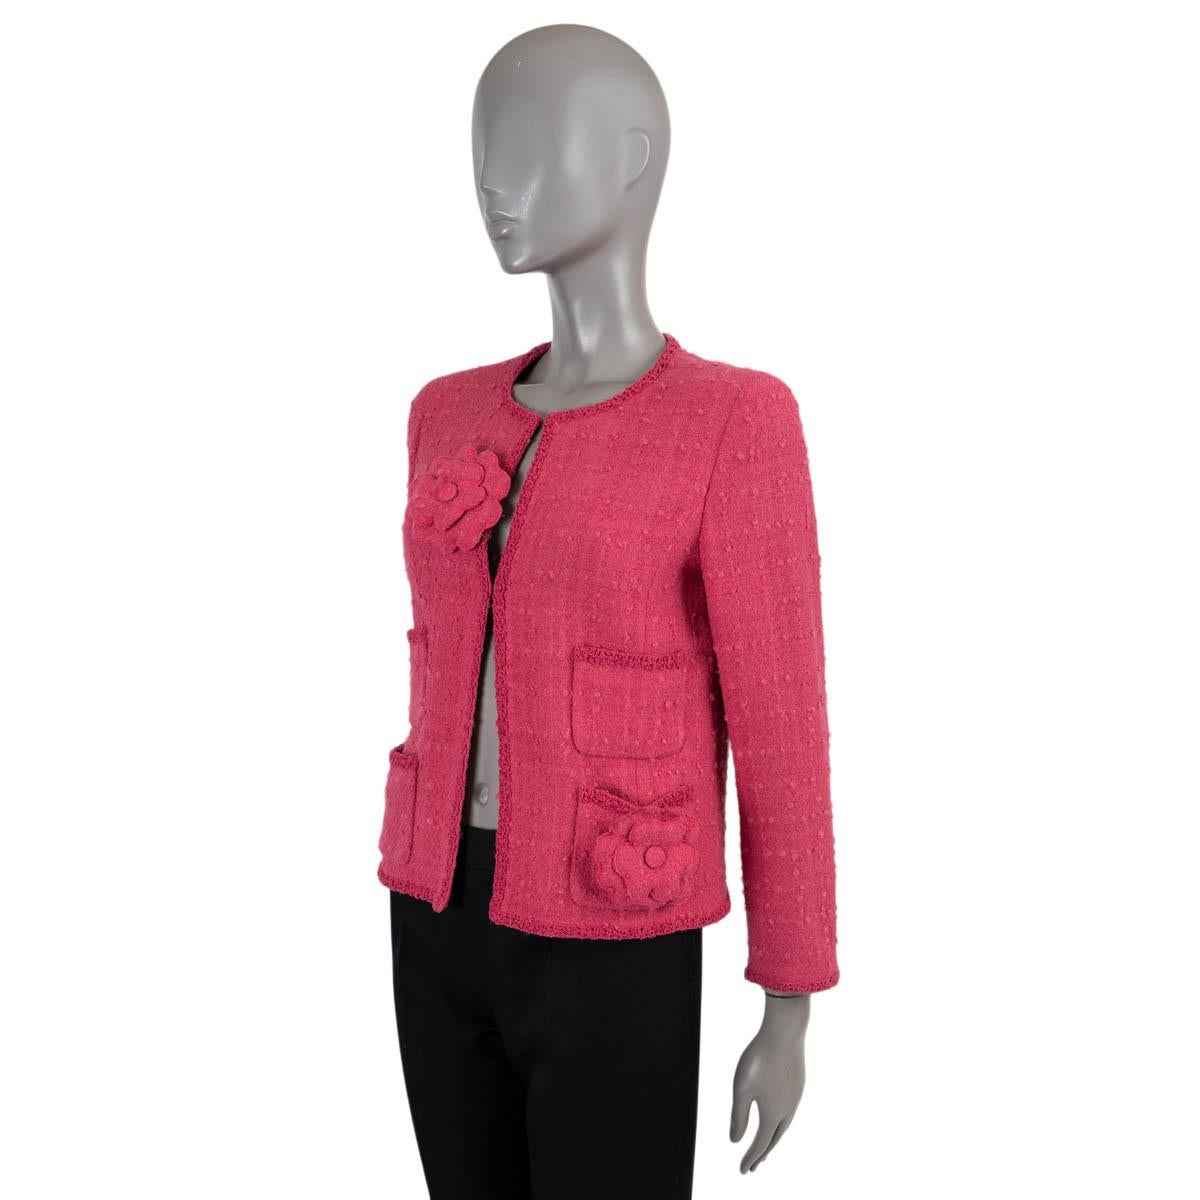 100% authentic Chanel tweed jacket in raspberry pink wool (90%), nylon (5%) and mohair (5%). Features a collarless, straight-cut silhouette with four open pockets on the front and adorned with two Camellias. Closes with concealed hooks and is lined